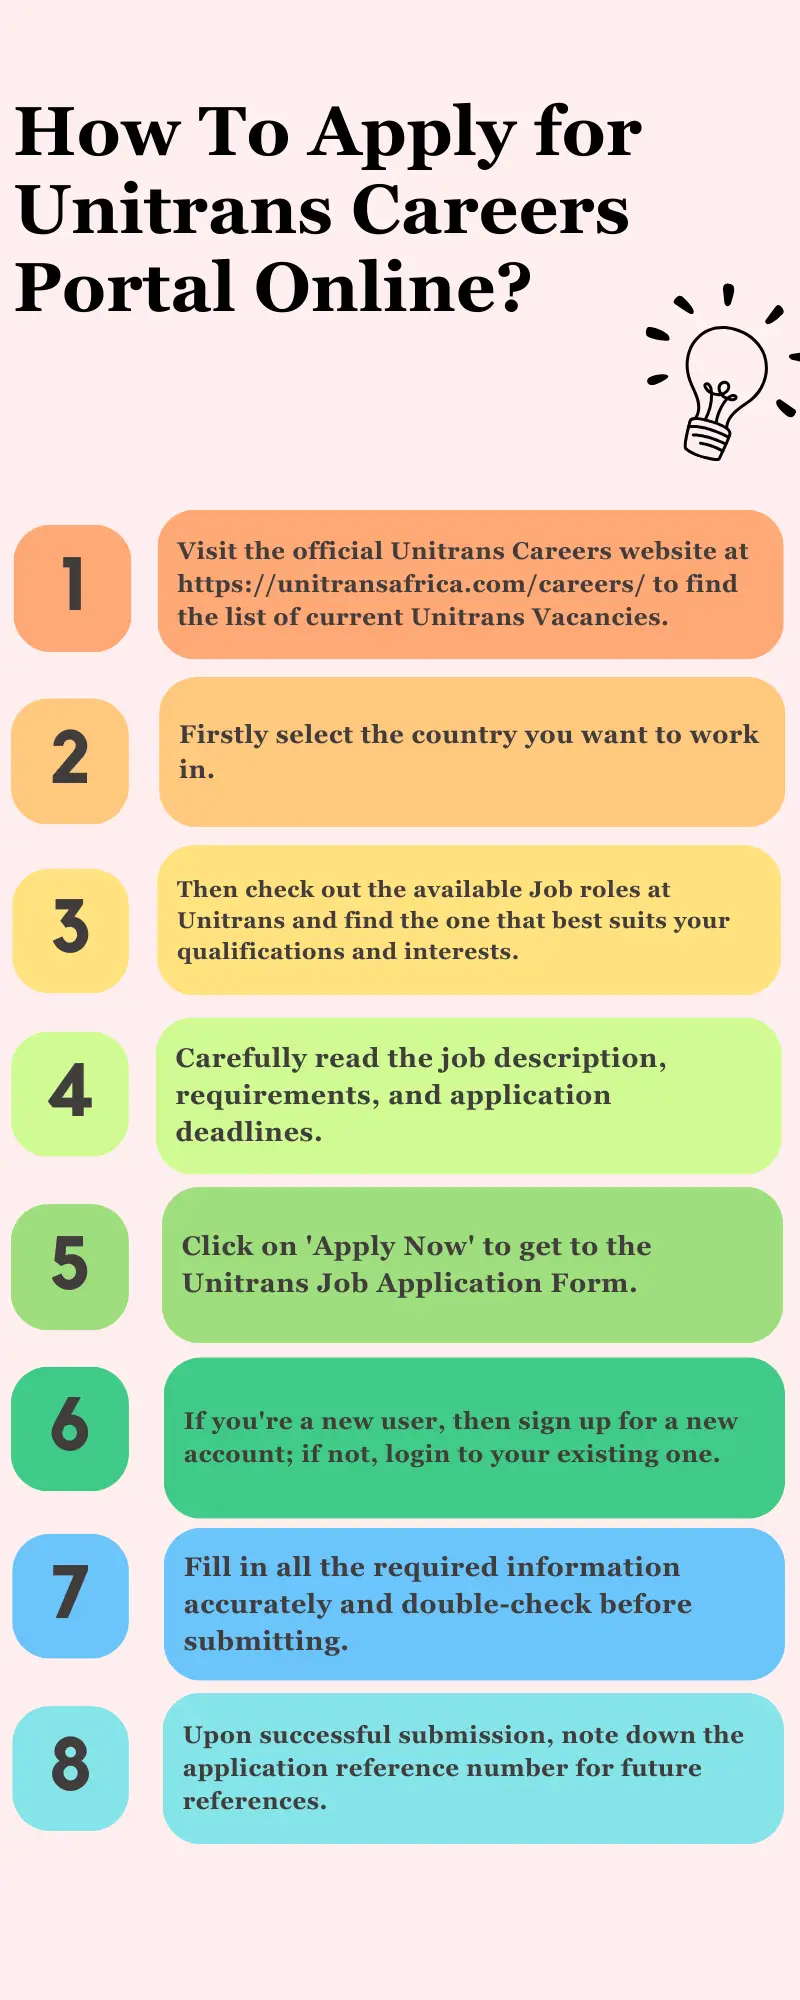 How To Apply for Unitrans Careers Portal Online?